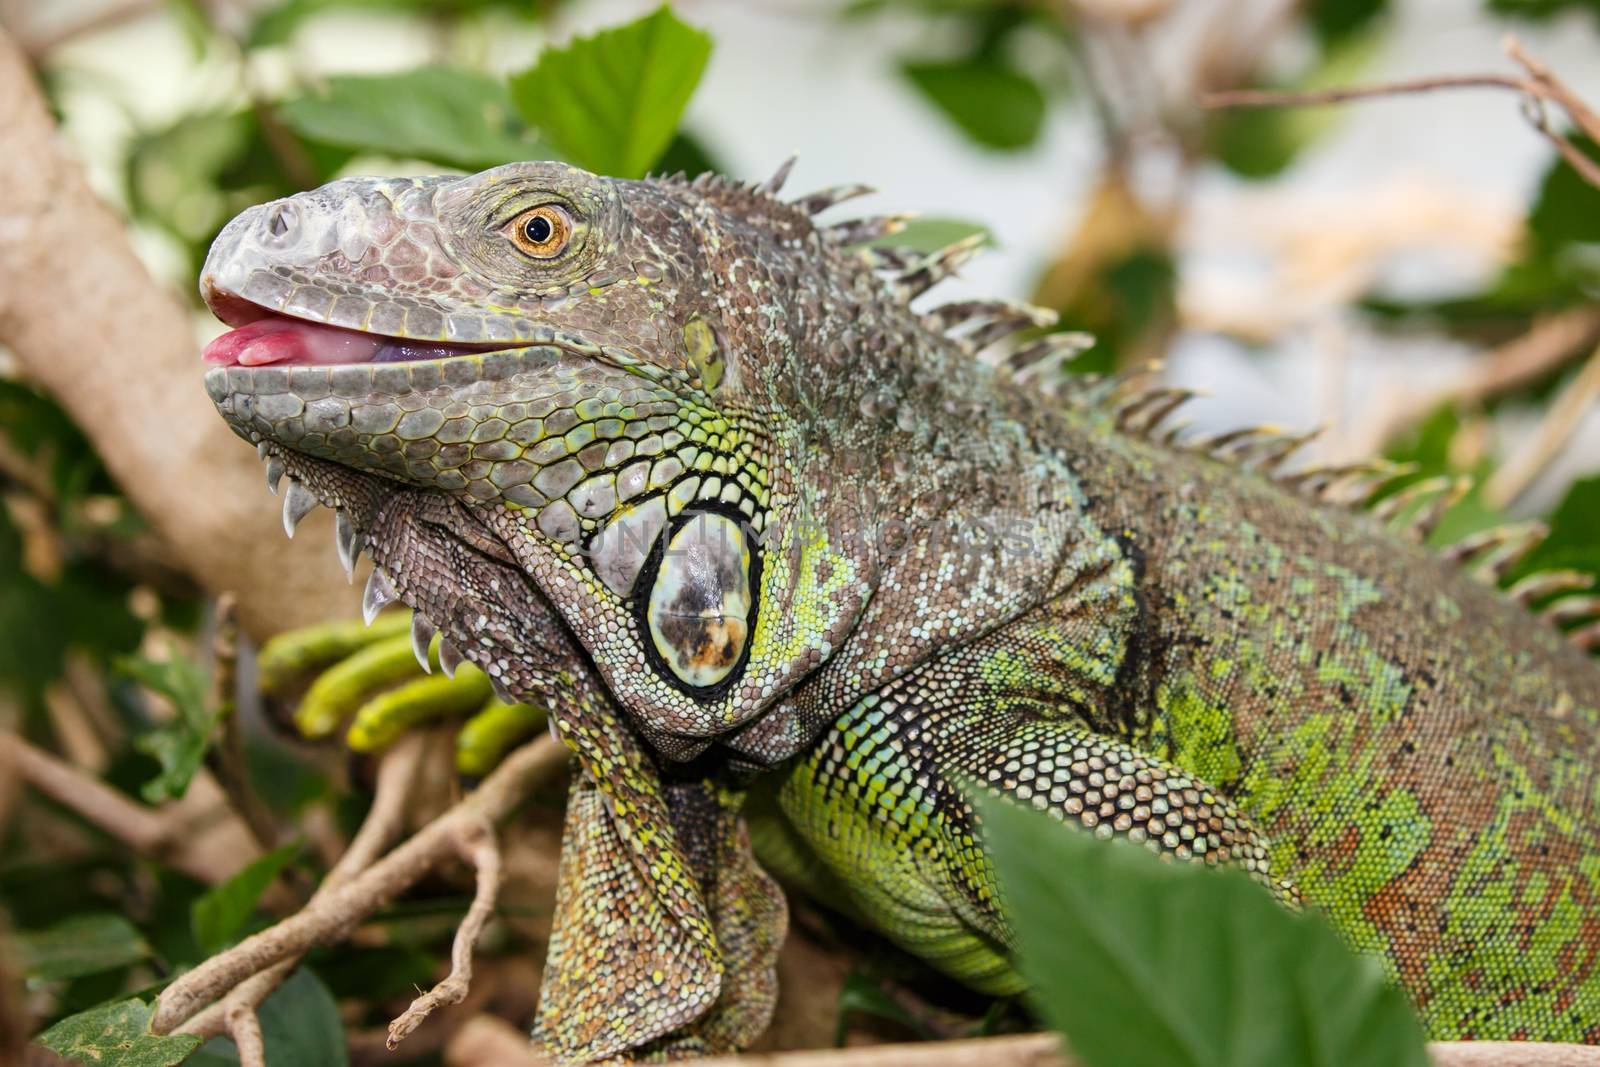 Green Iguana reptile with delicately detailed skin with tongue showing